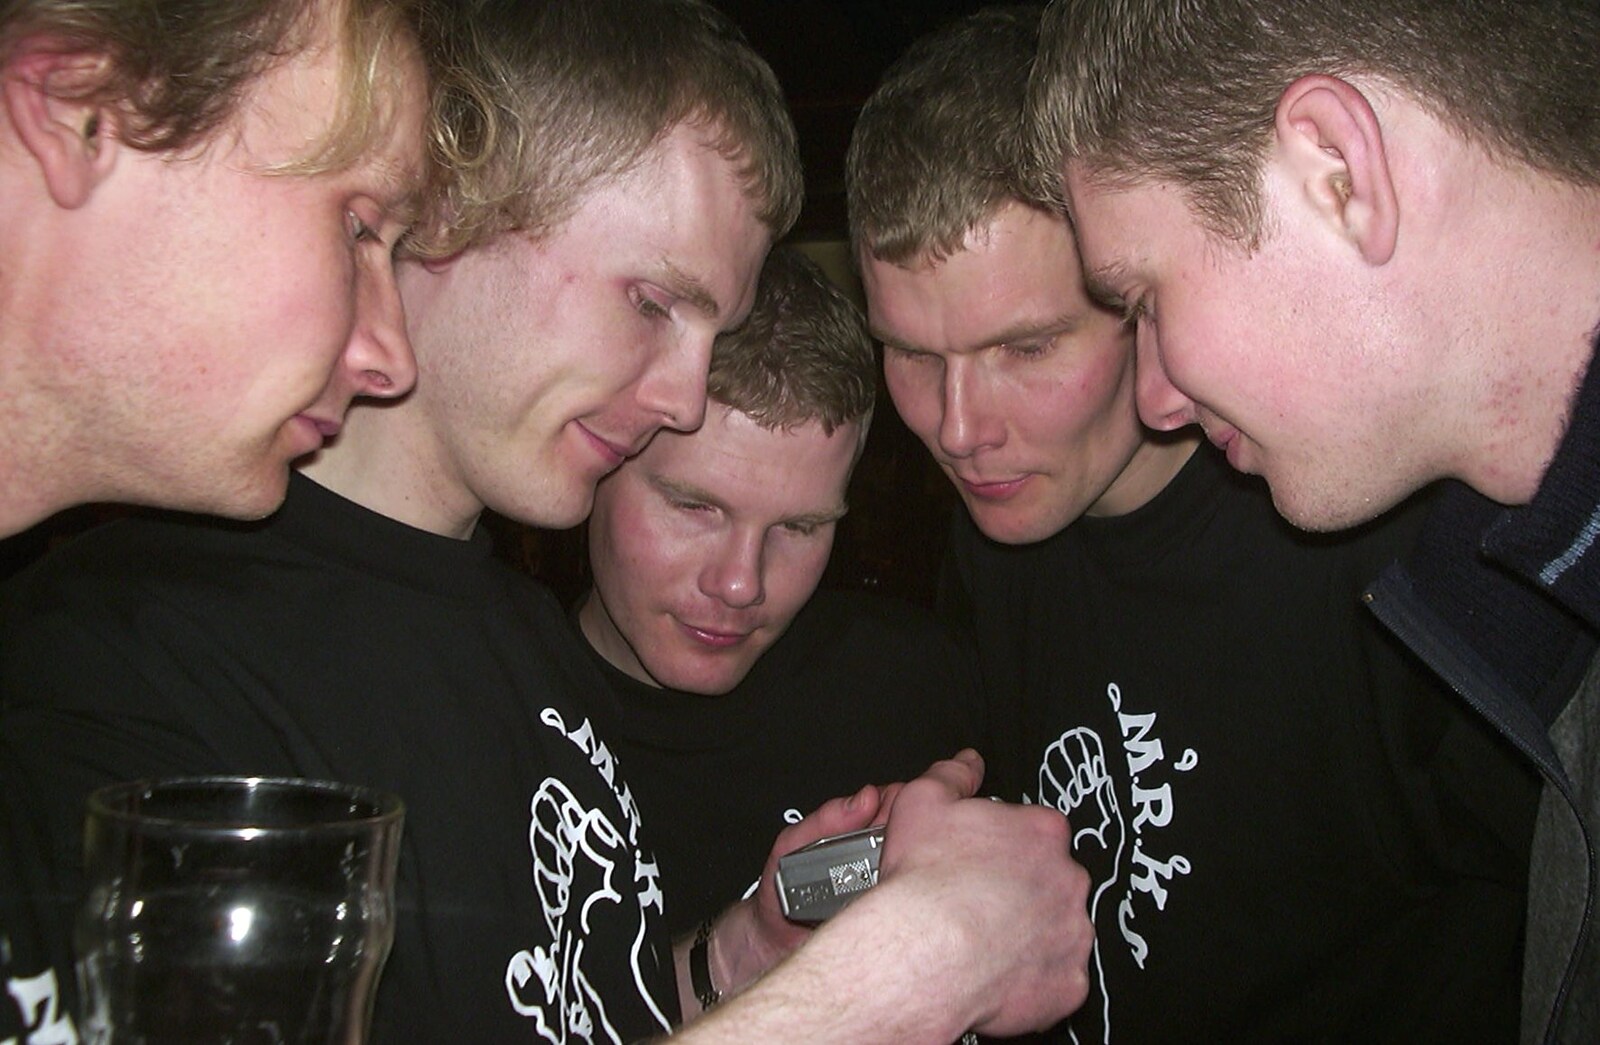 The boys look at photos on a camera from Anne Frank, Markets and Mikey-P's Stag Do, Amsterdam, Netherlands - 6th March 2004